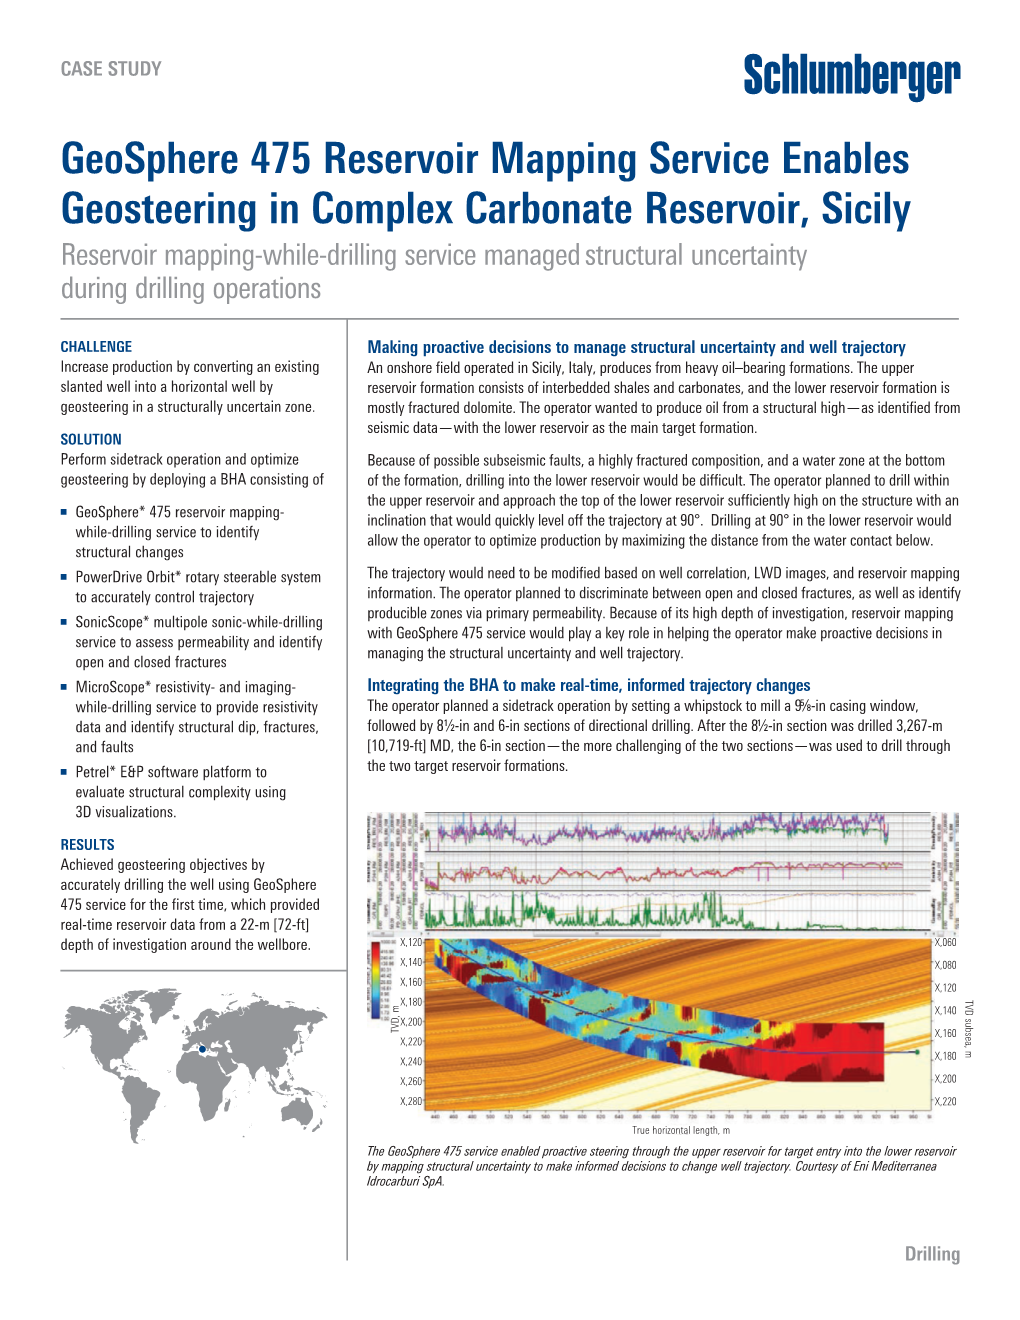 Geosphere 475 Reservoir Mapping Service Enables Geosteering in Complex Carbonate Reservoir, Sicily